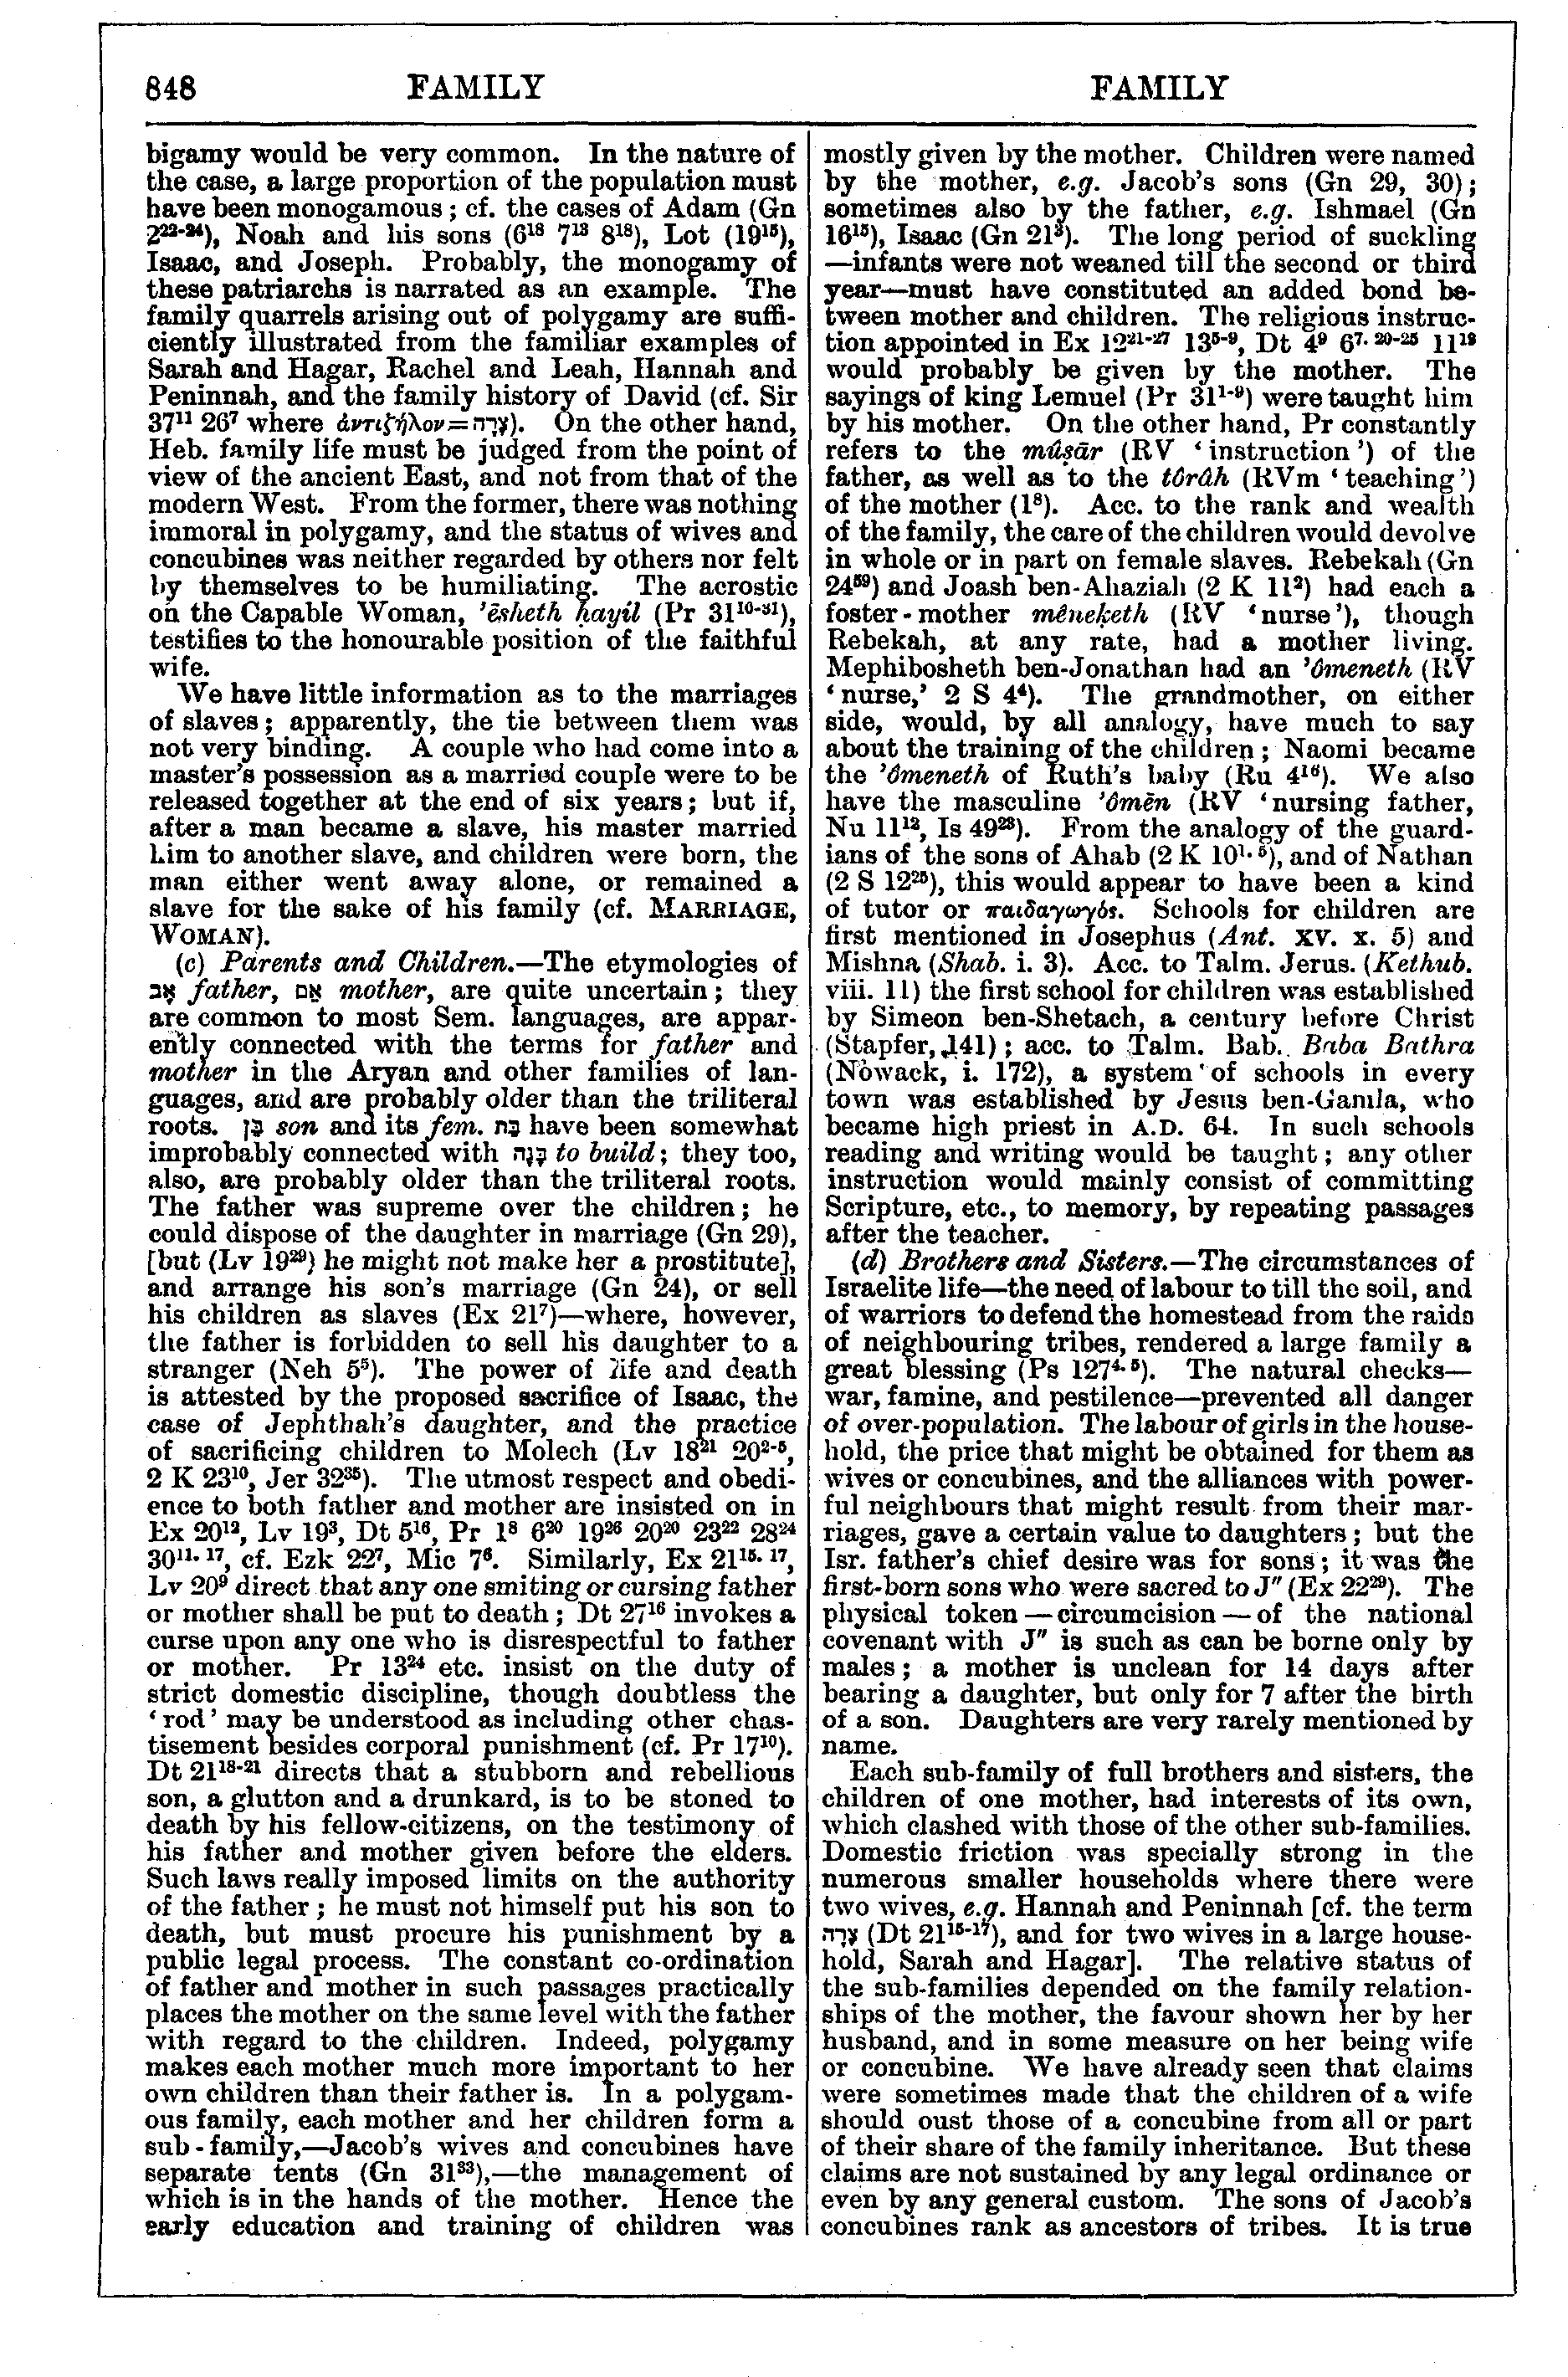 Image of page 848